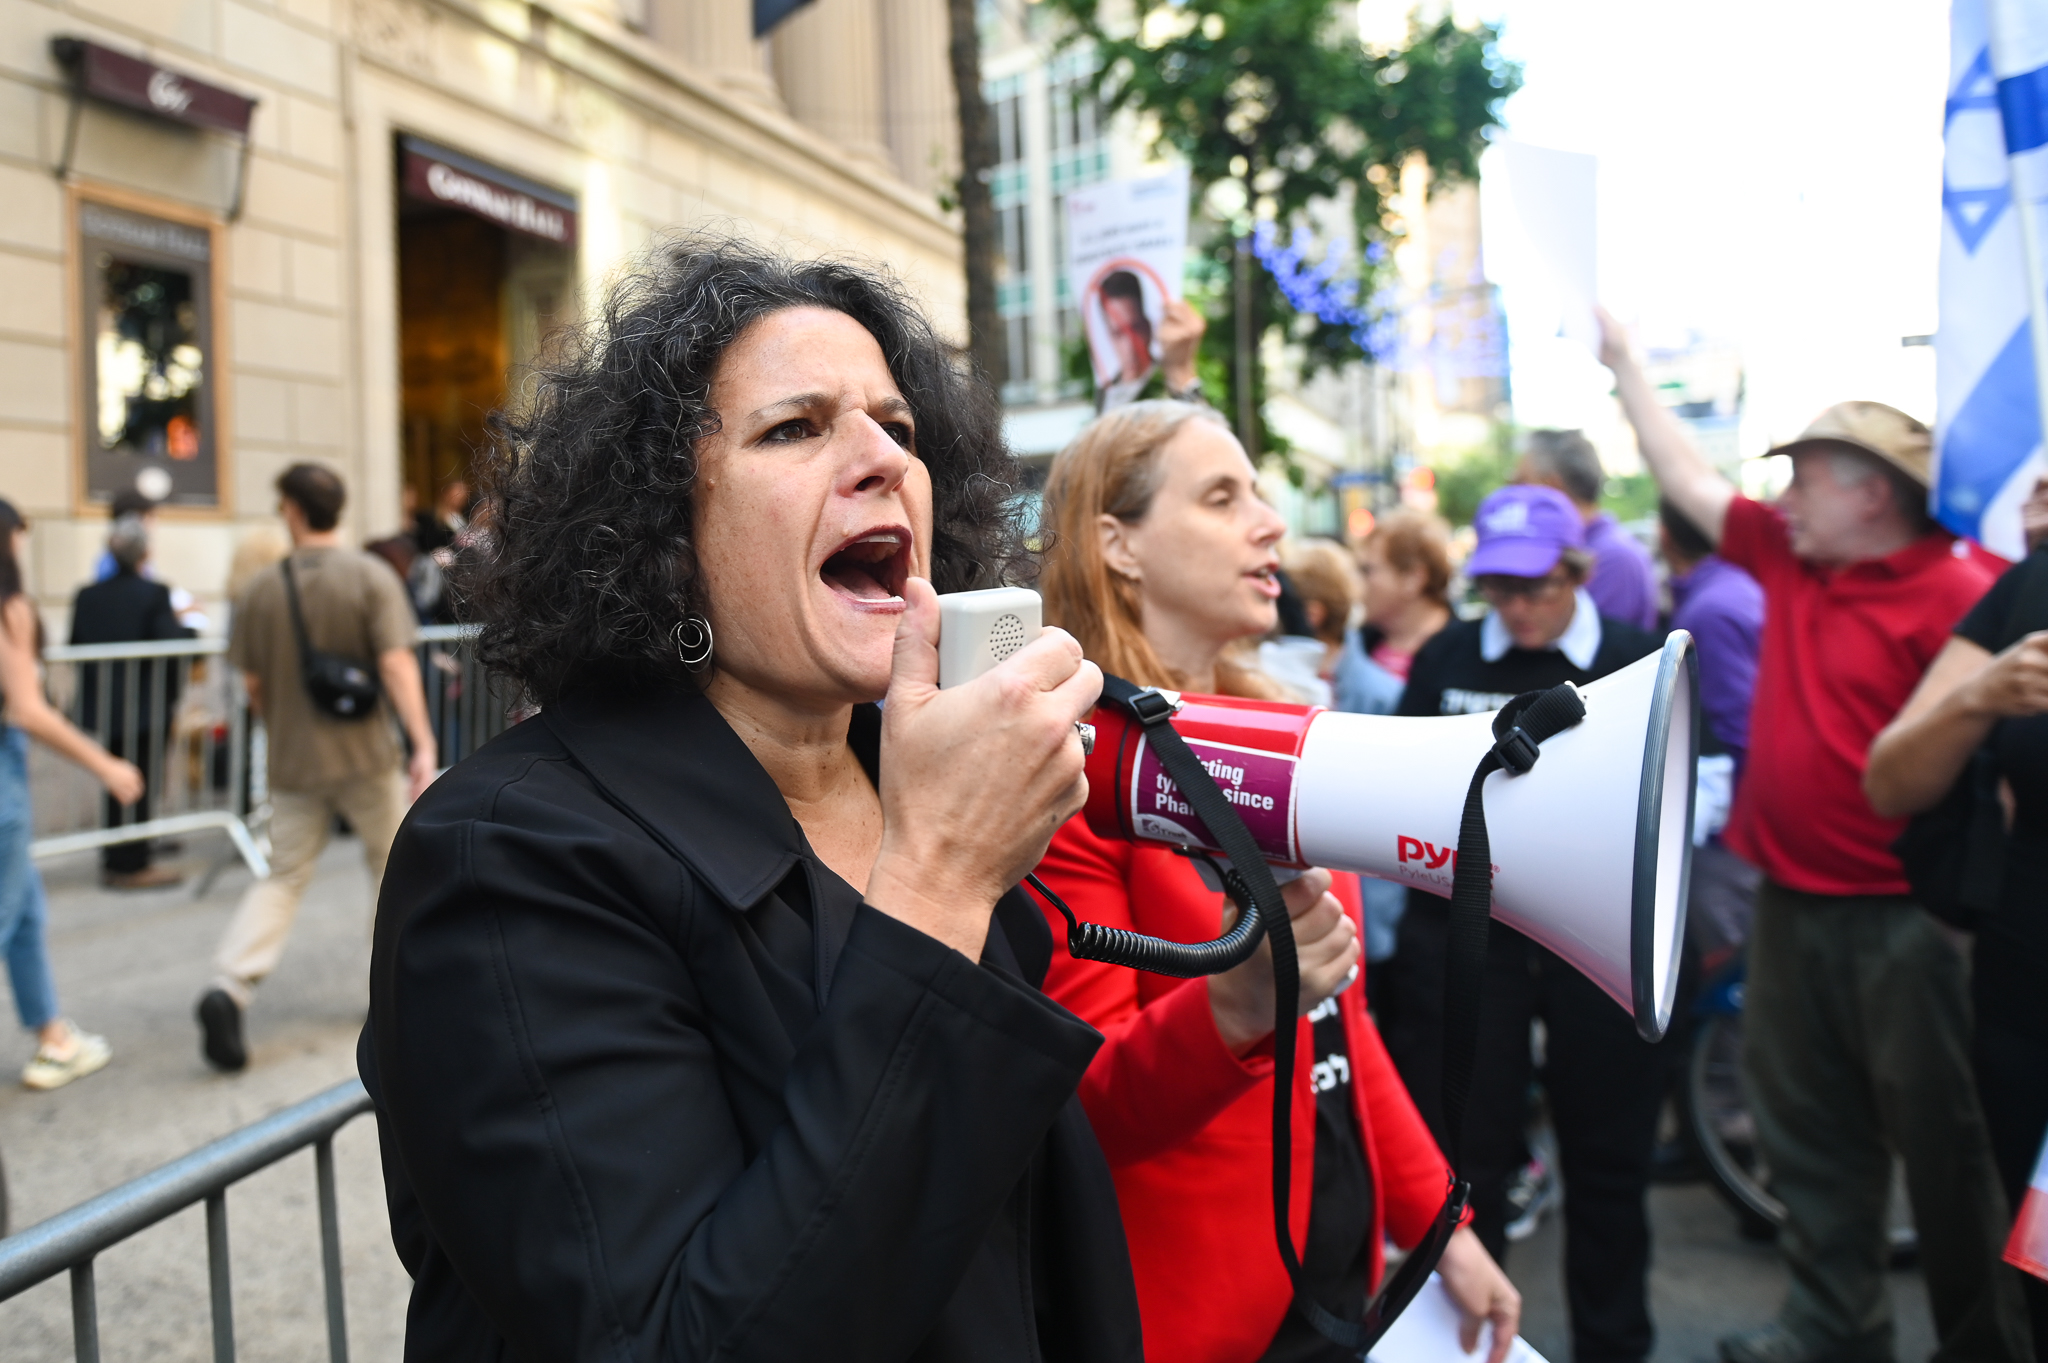 A woman in kippah and blazer speaks into a megaphone with protest in background